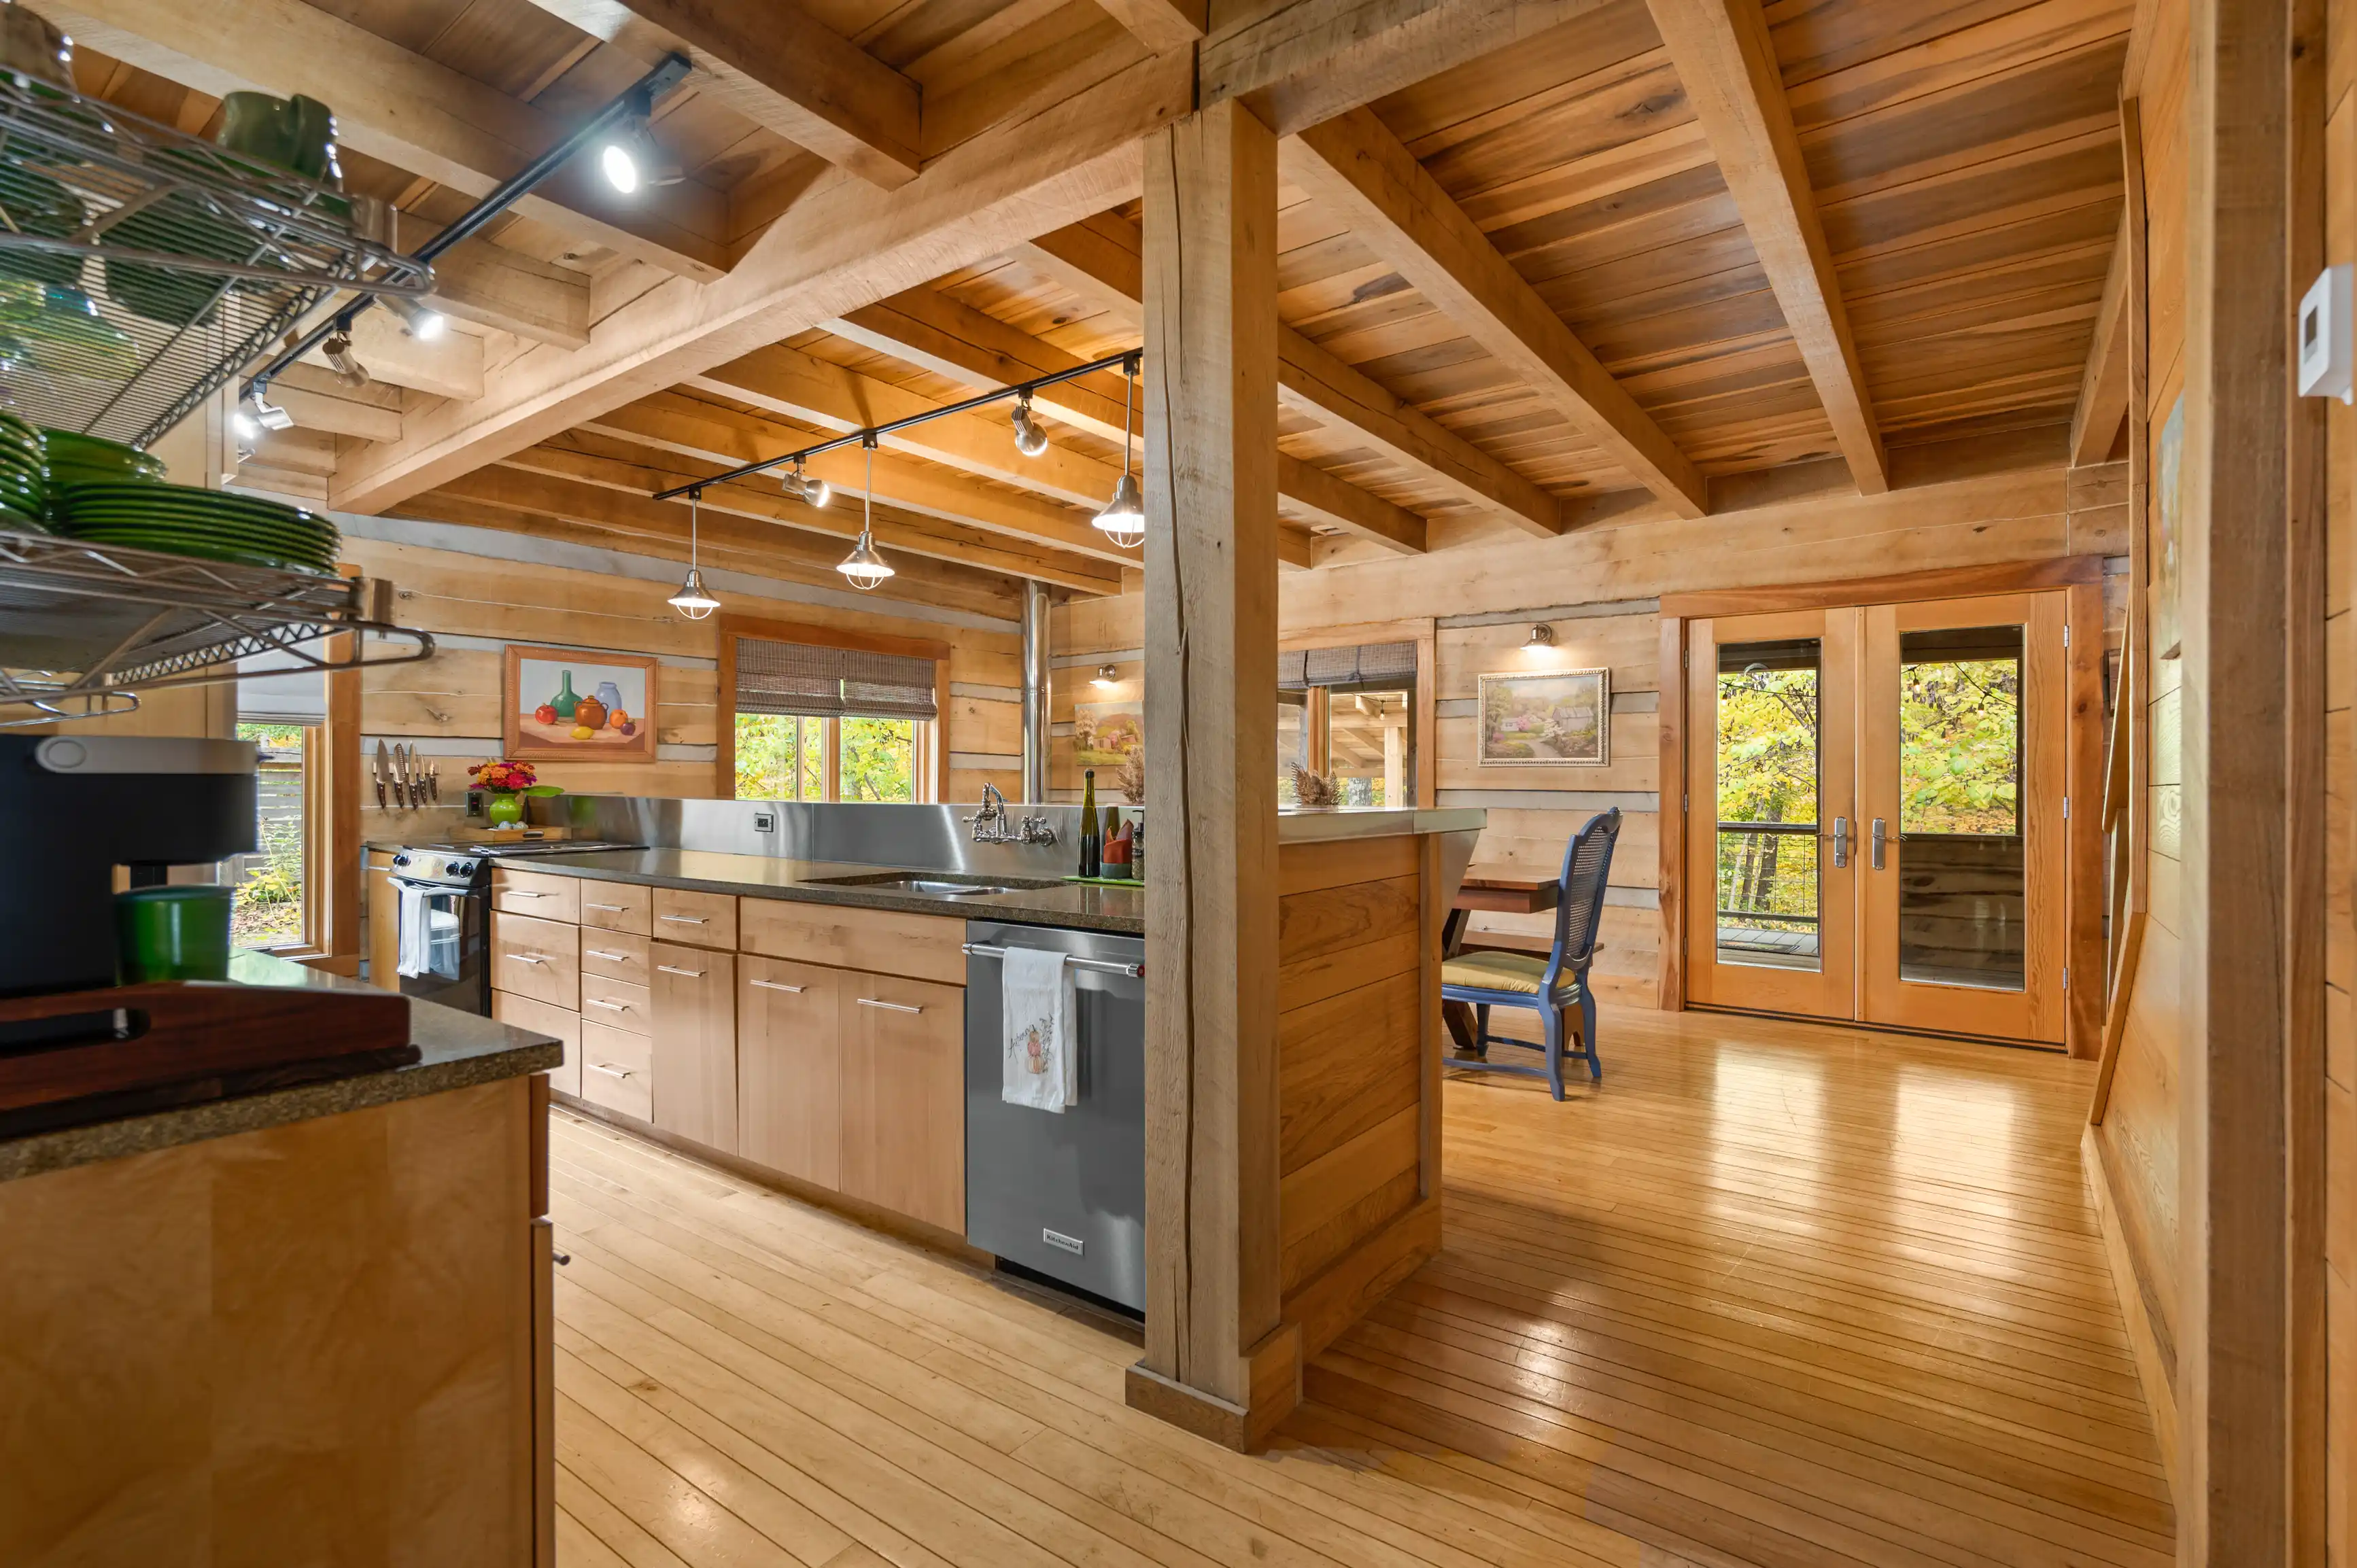 Rustic wooden kitchen interior with exposed beams, stainless steel appliances, and pendant lighting with a view of trees through glass doors.